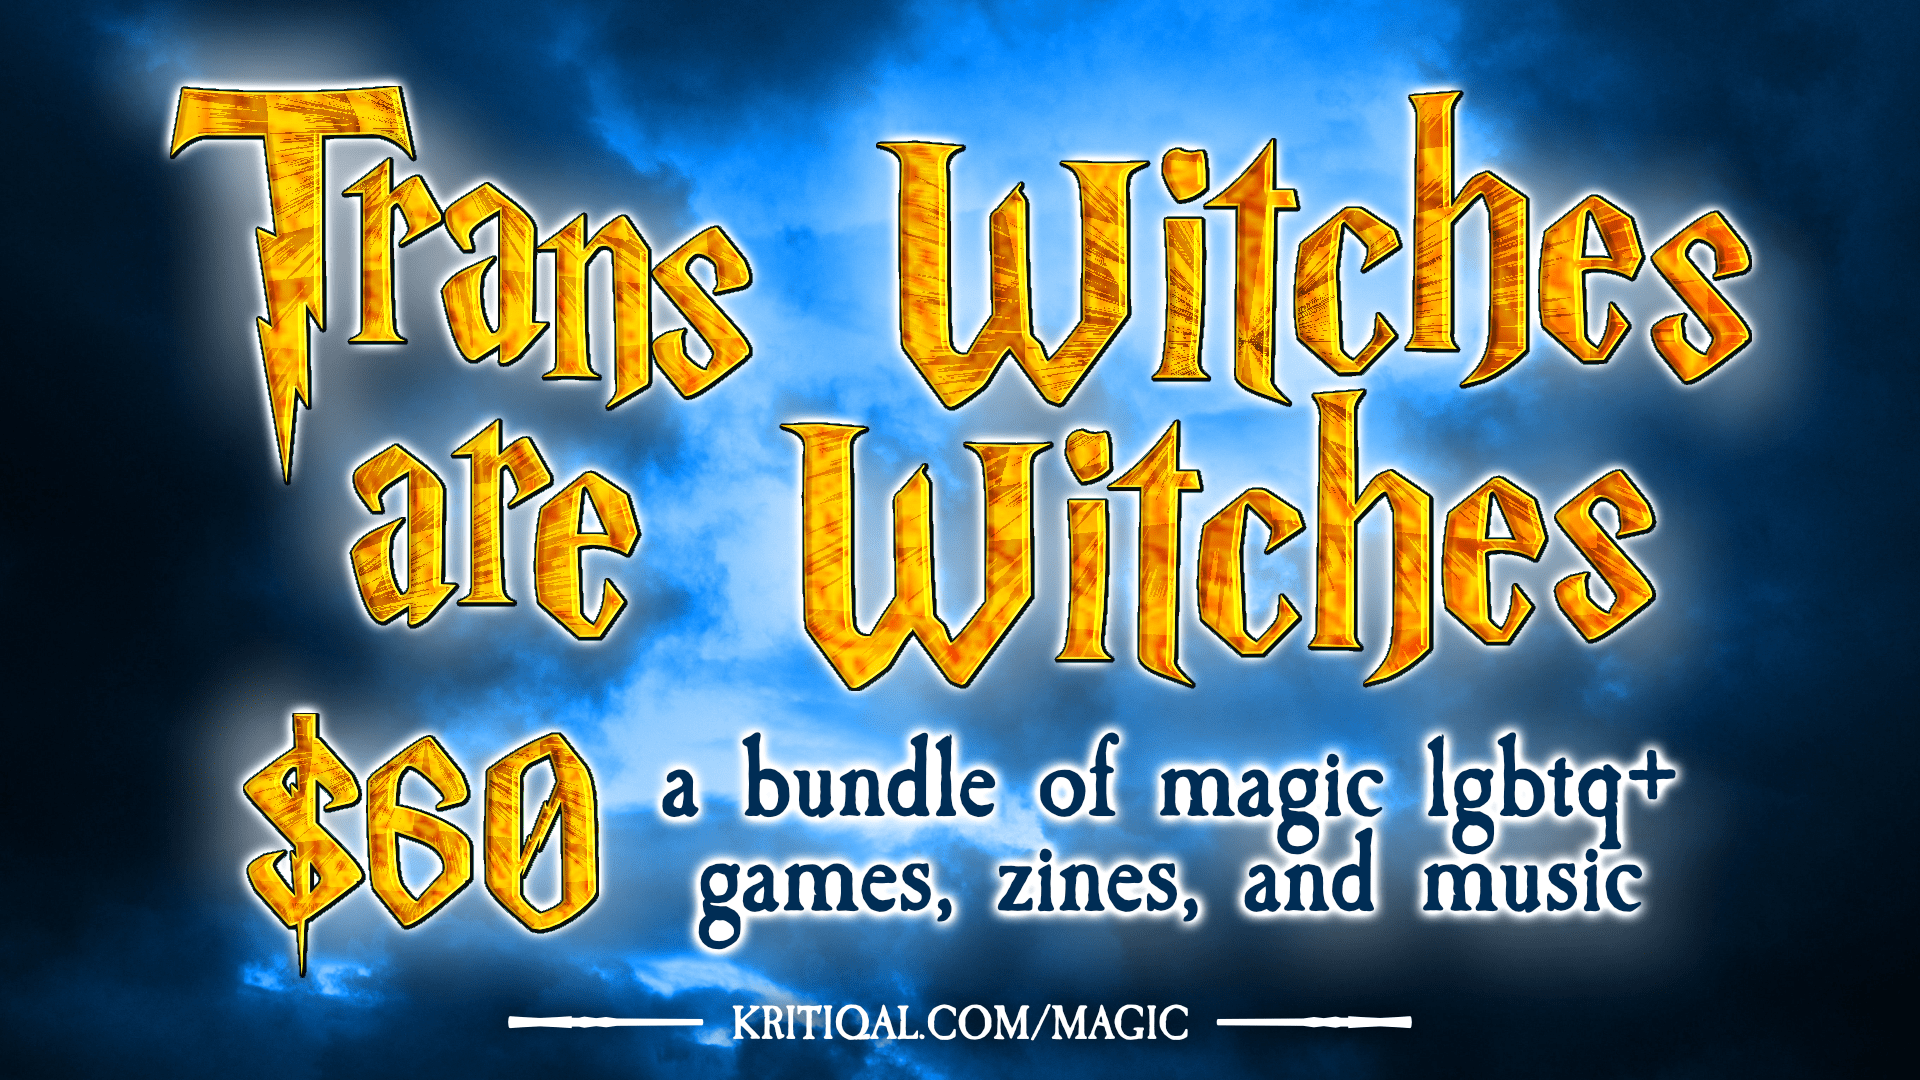 Trans Witch Games Bundle Is A Cool Alternative To Hogwarts Legacy